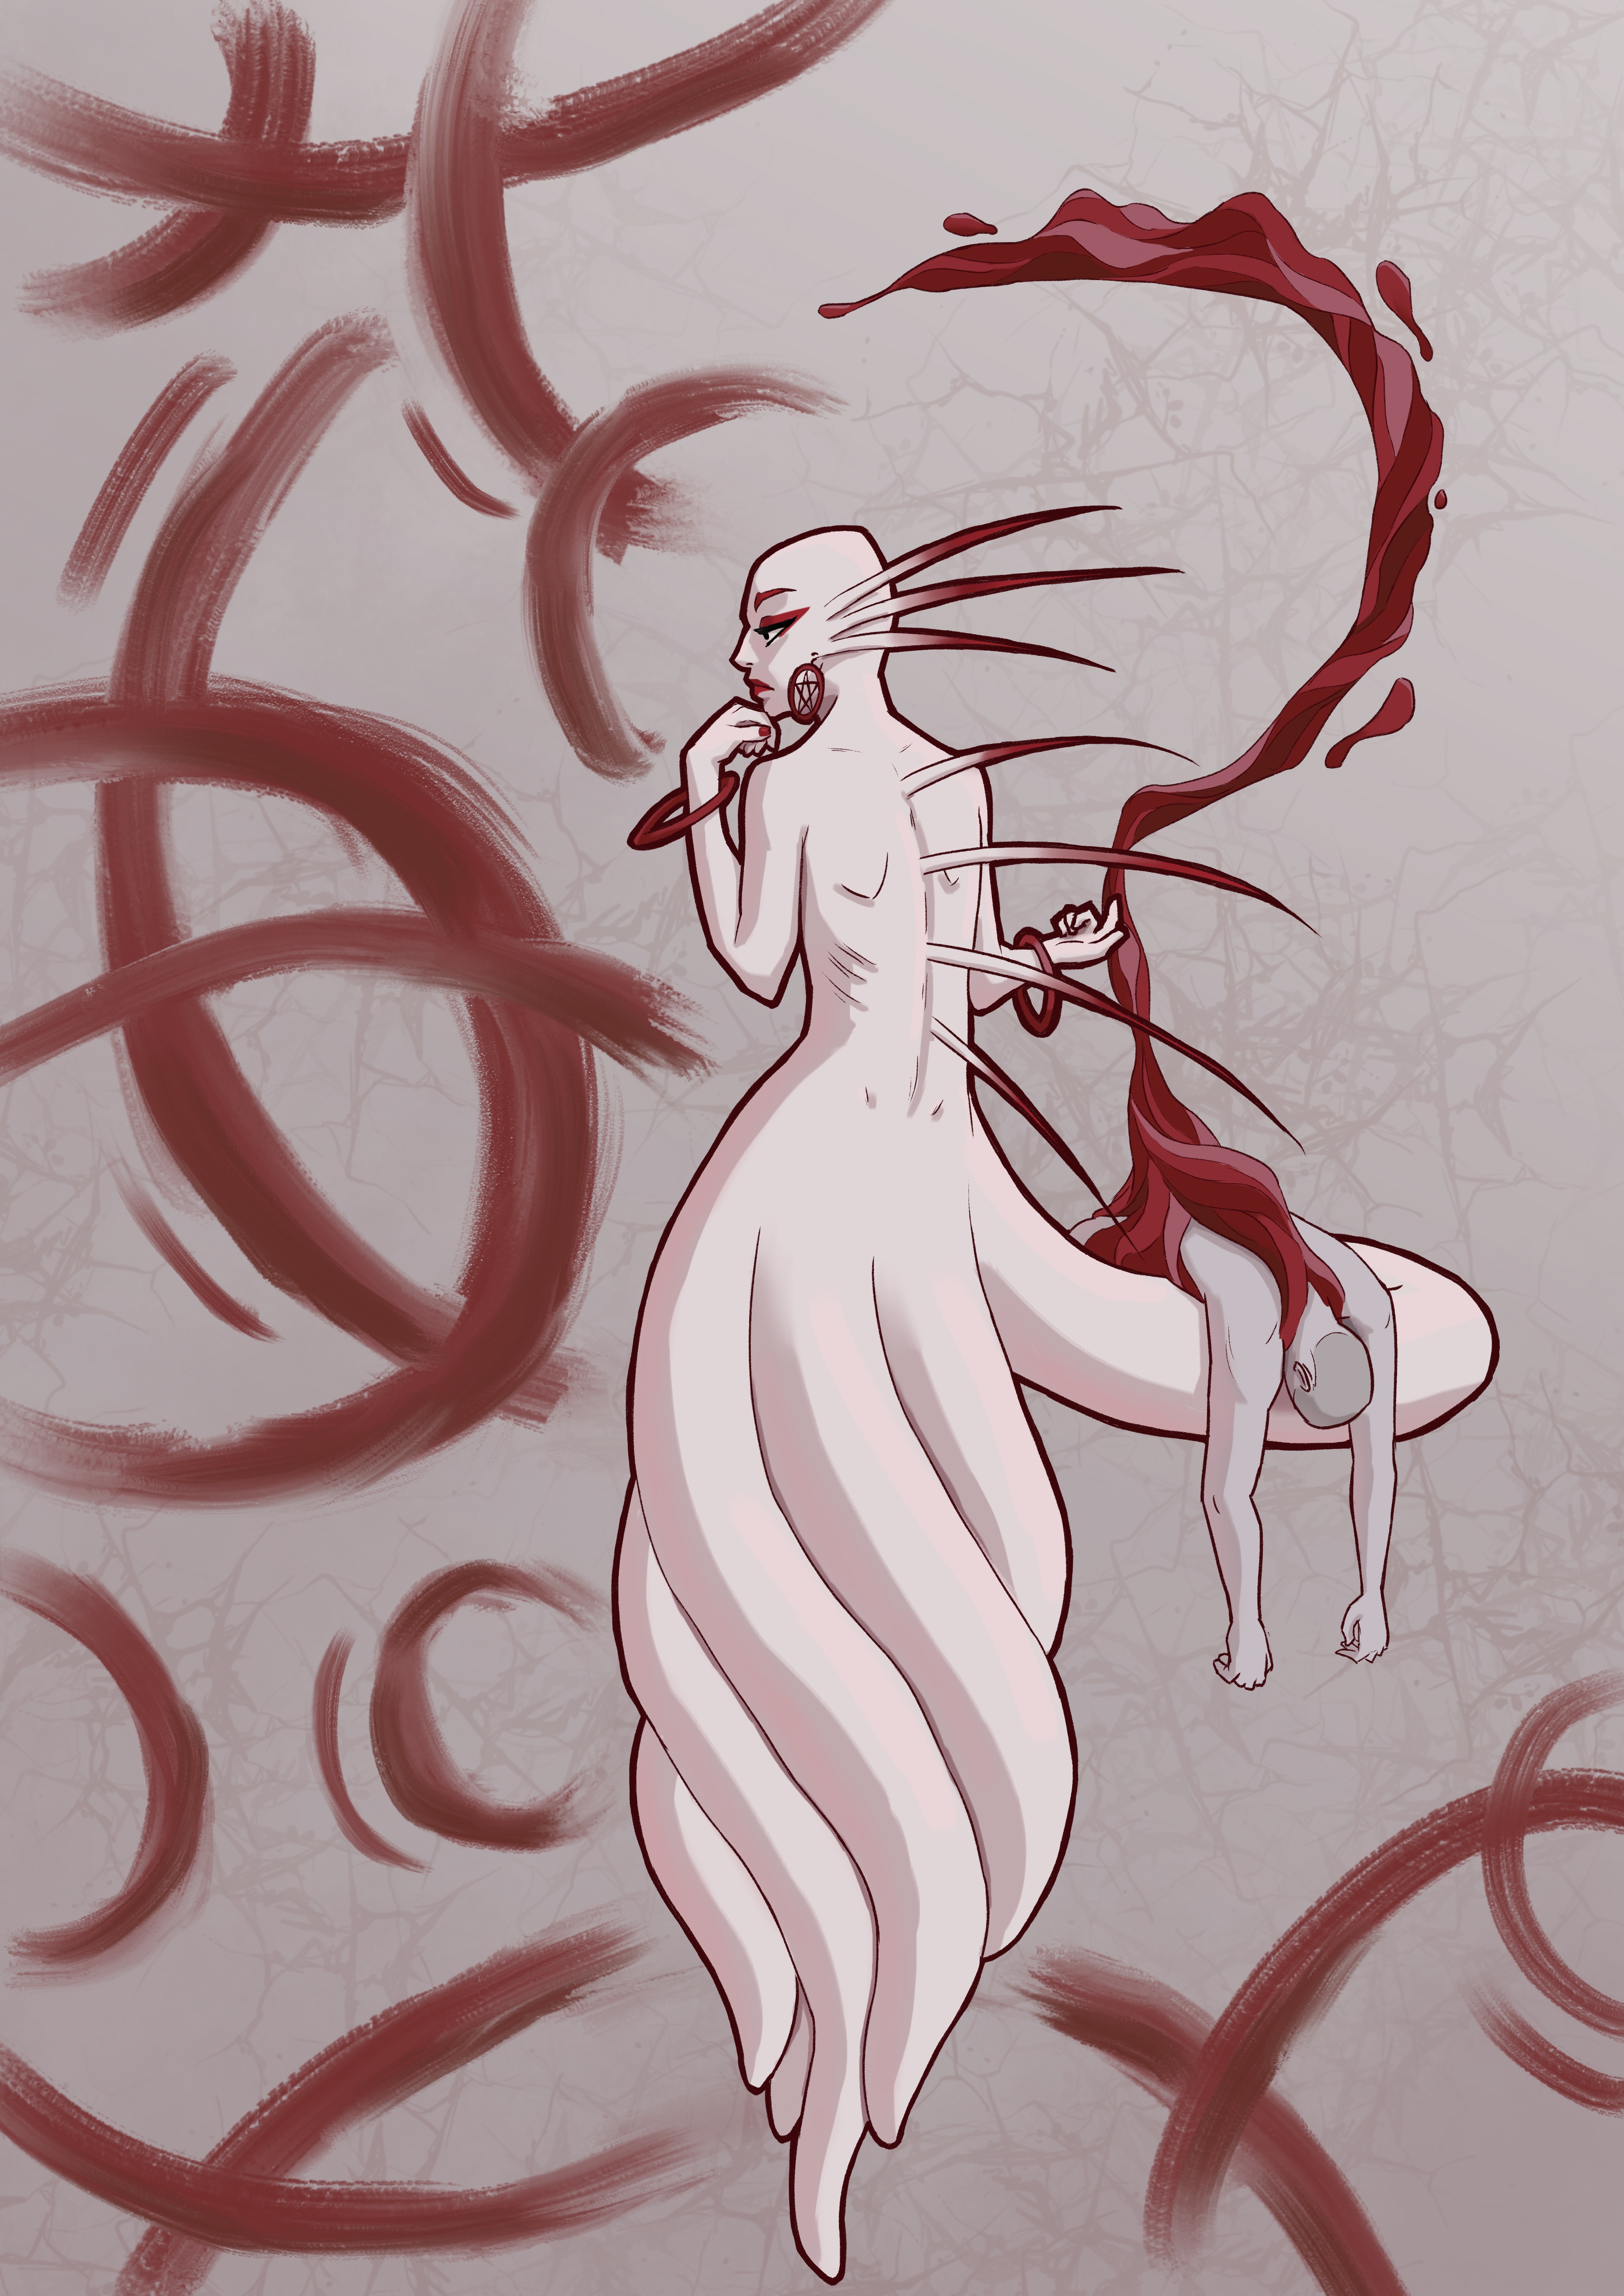 A digital drawing of a porcelain-white mermaid with a bald
head, heavy crimson makeup, and a swirl of tentacles for a tail. They're
holding a corpse on one of the tentacles, magically draining blood from it.
They're looking at circular patterns of blood in the background with a
pondering expression.